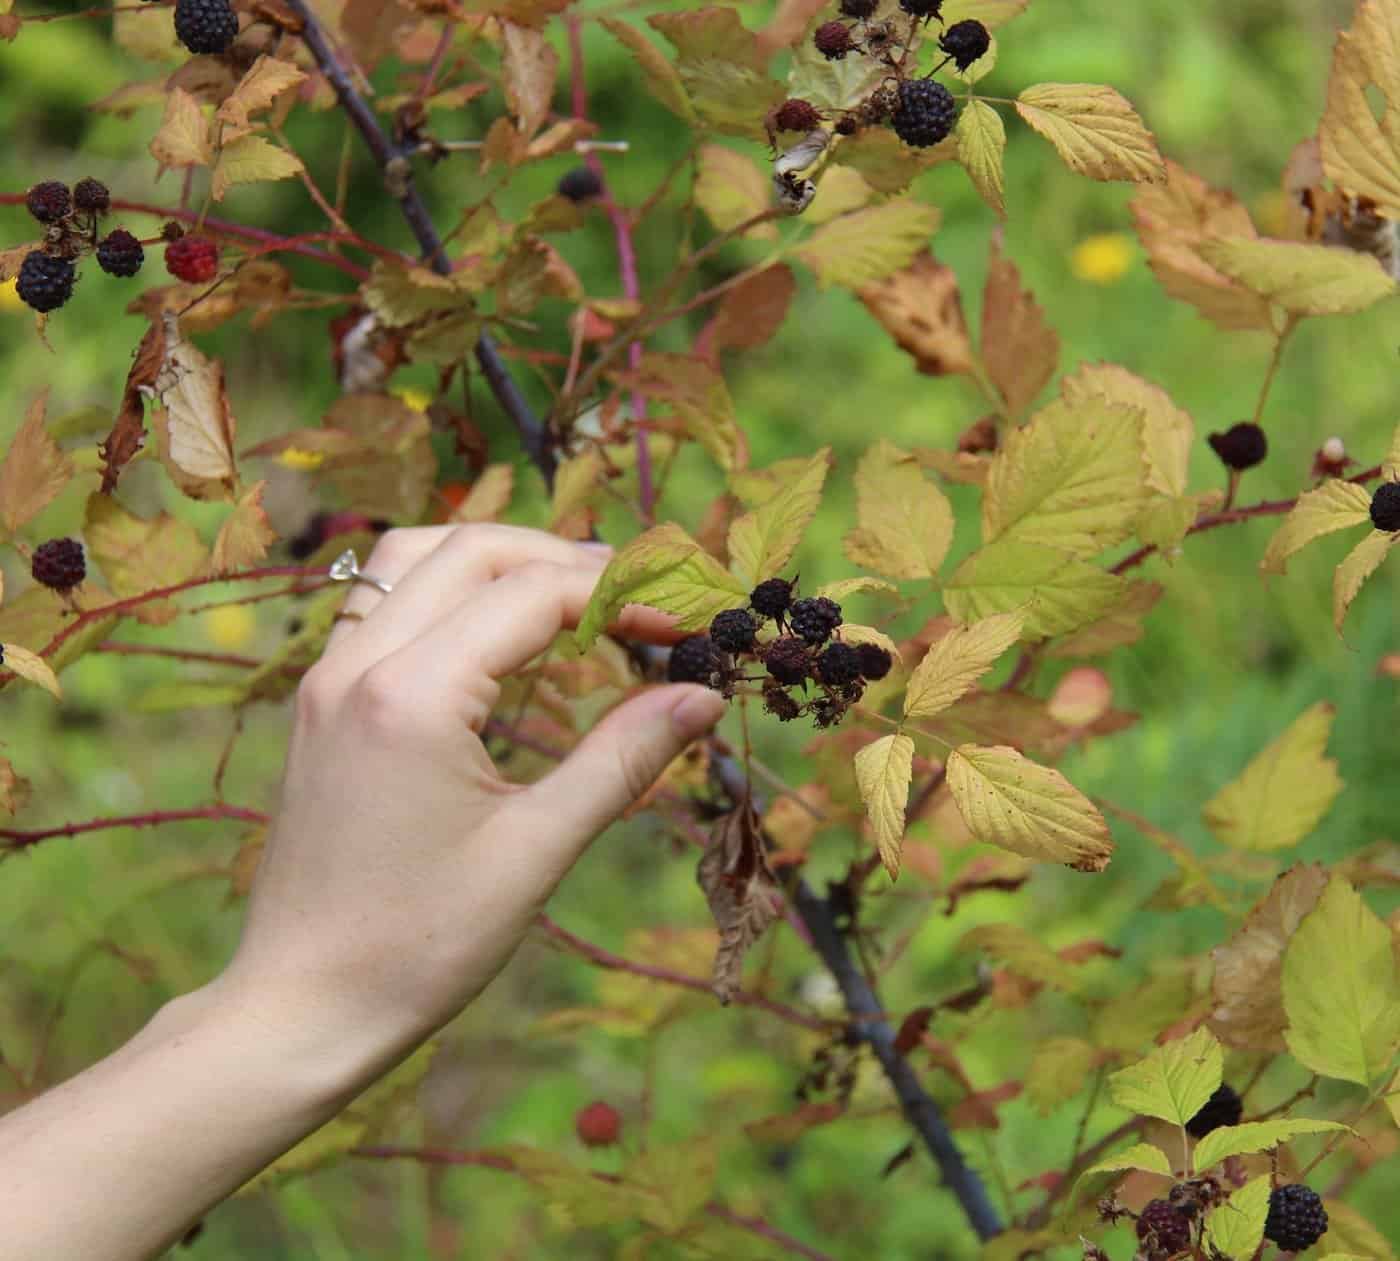 Hand foraging wild berries from a berry plant